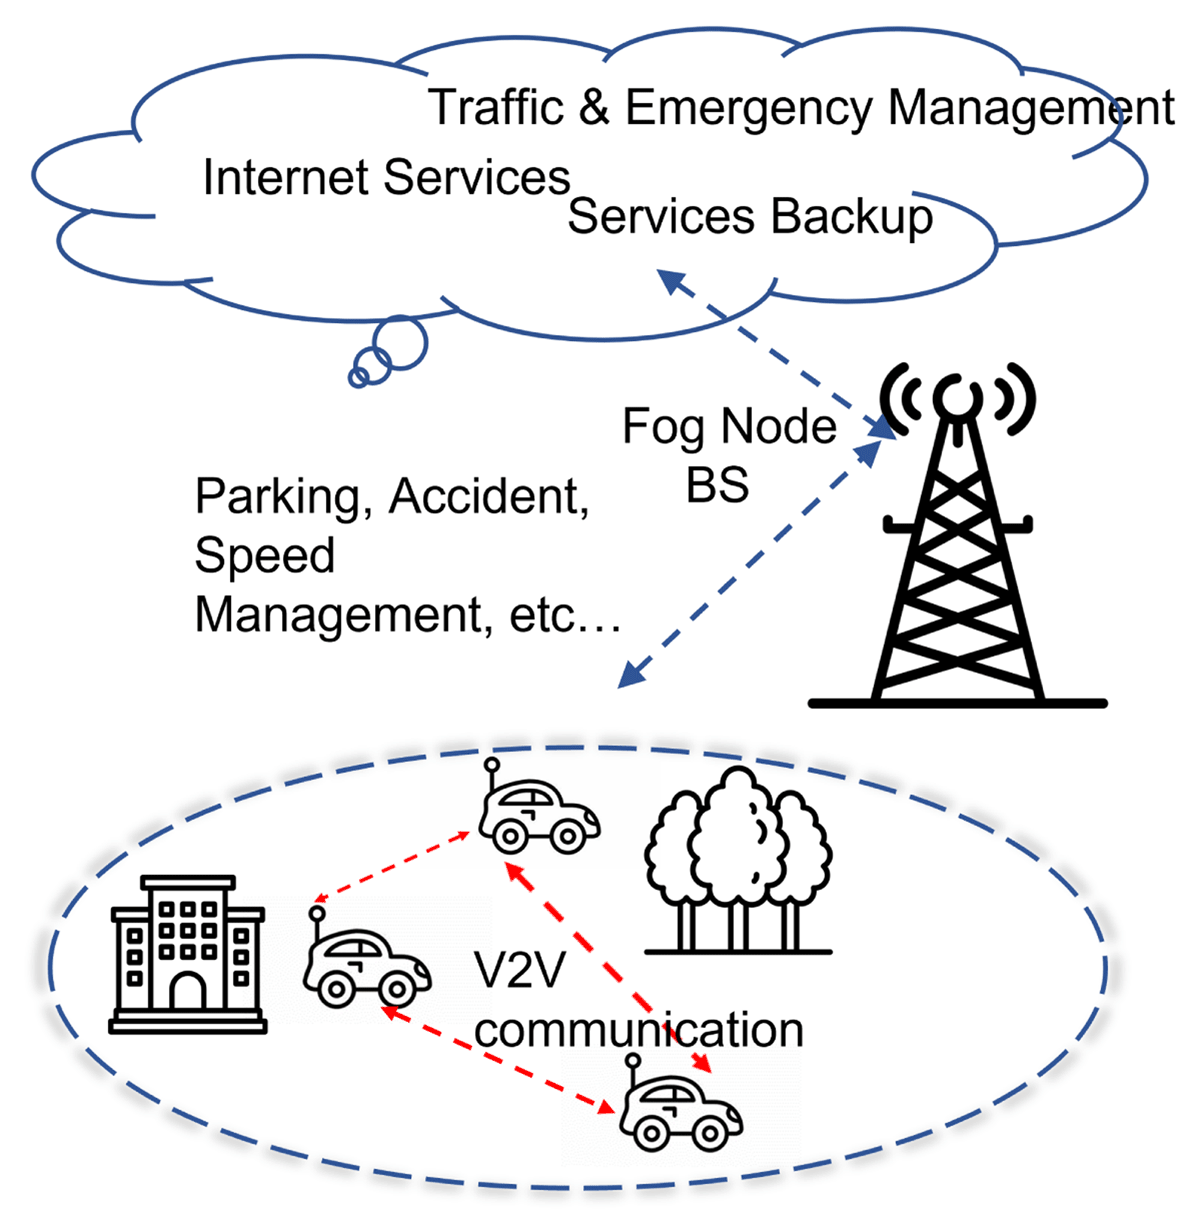 An image showing various vehicular applications that can be served either by centralized cloud in the data center or by distributed fog close to the edge devices